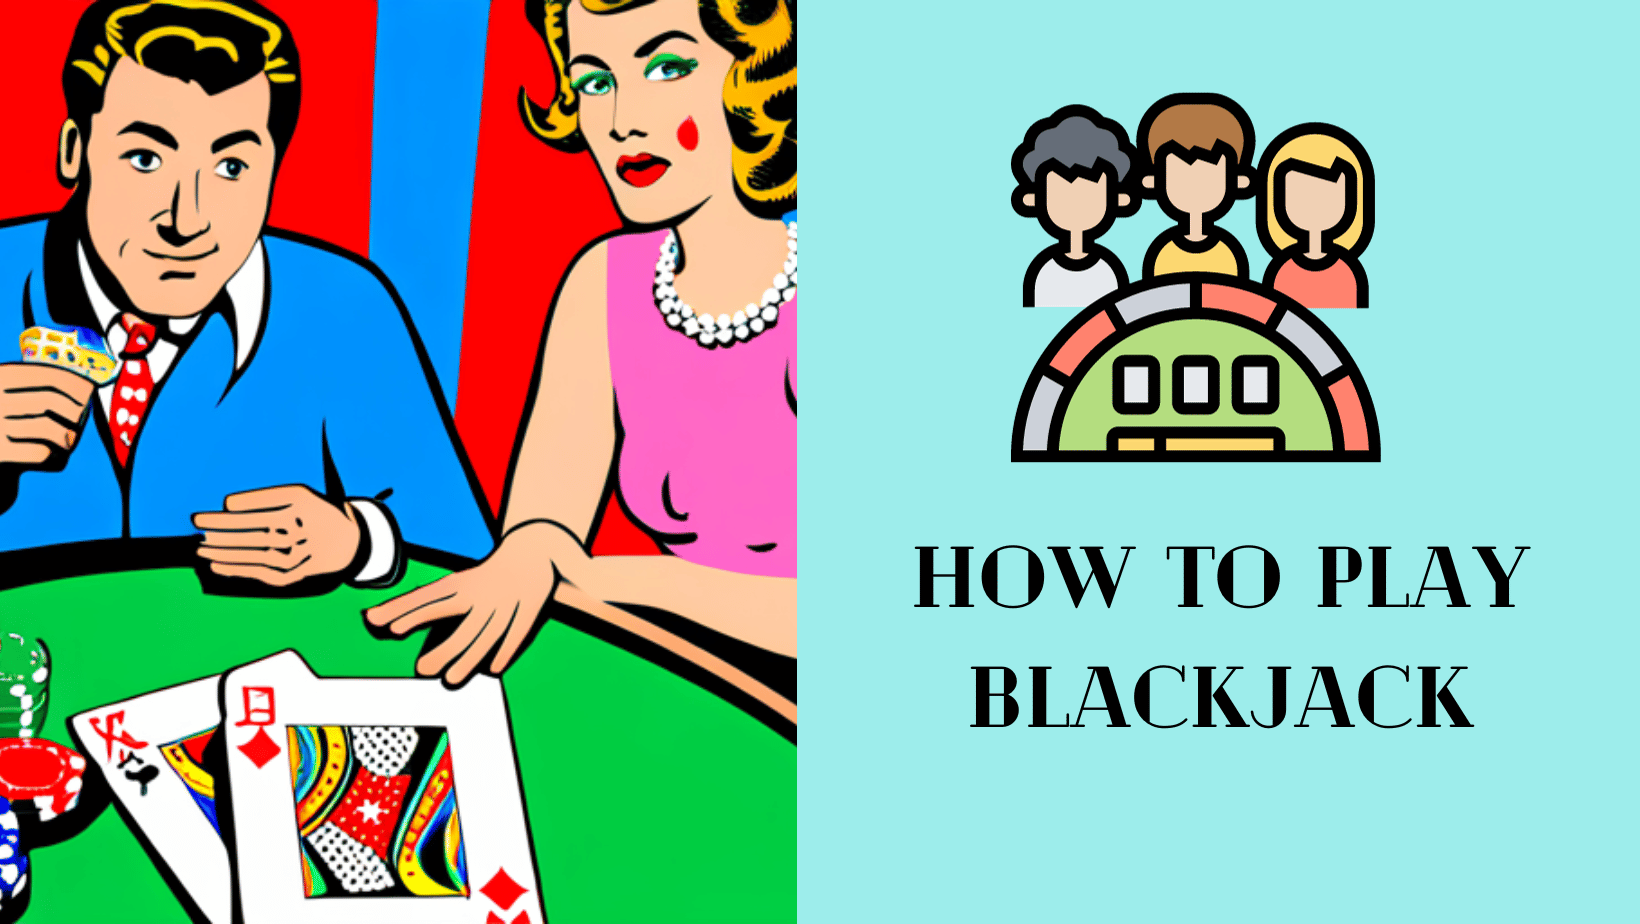 Learn how to play blackjack easily and quickly